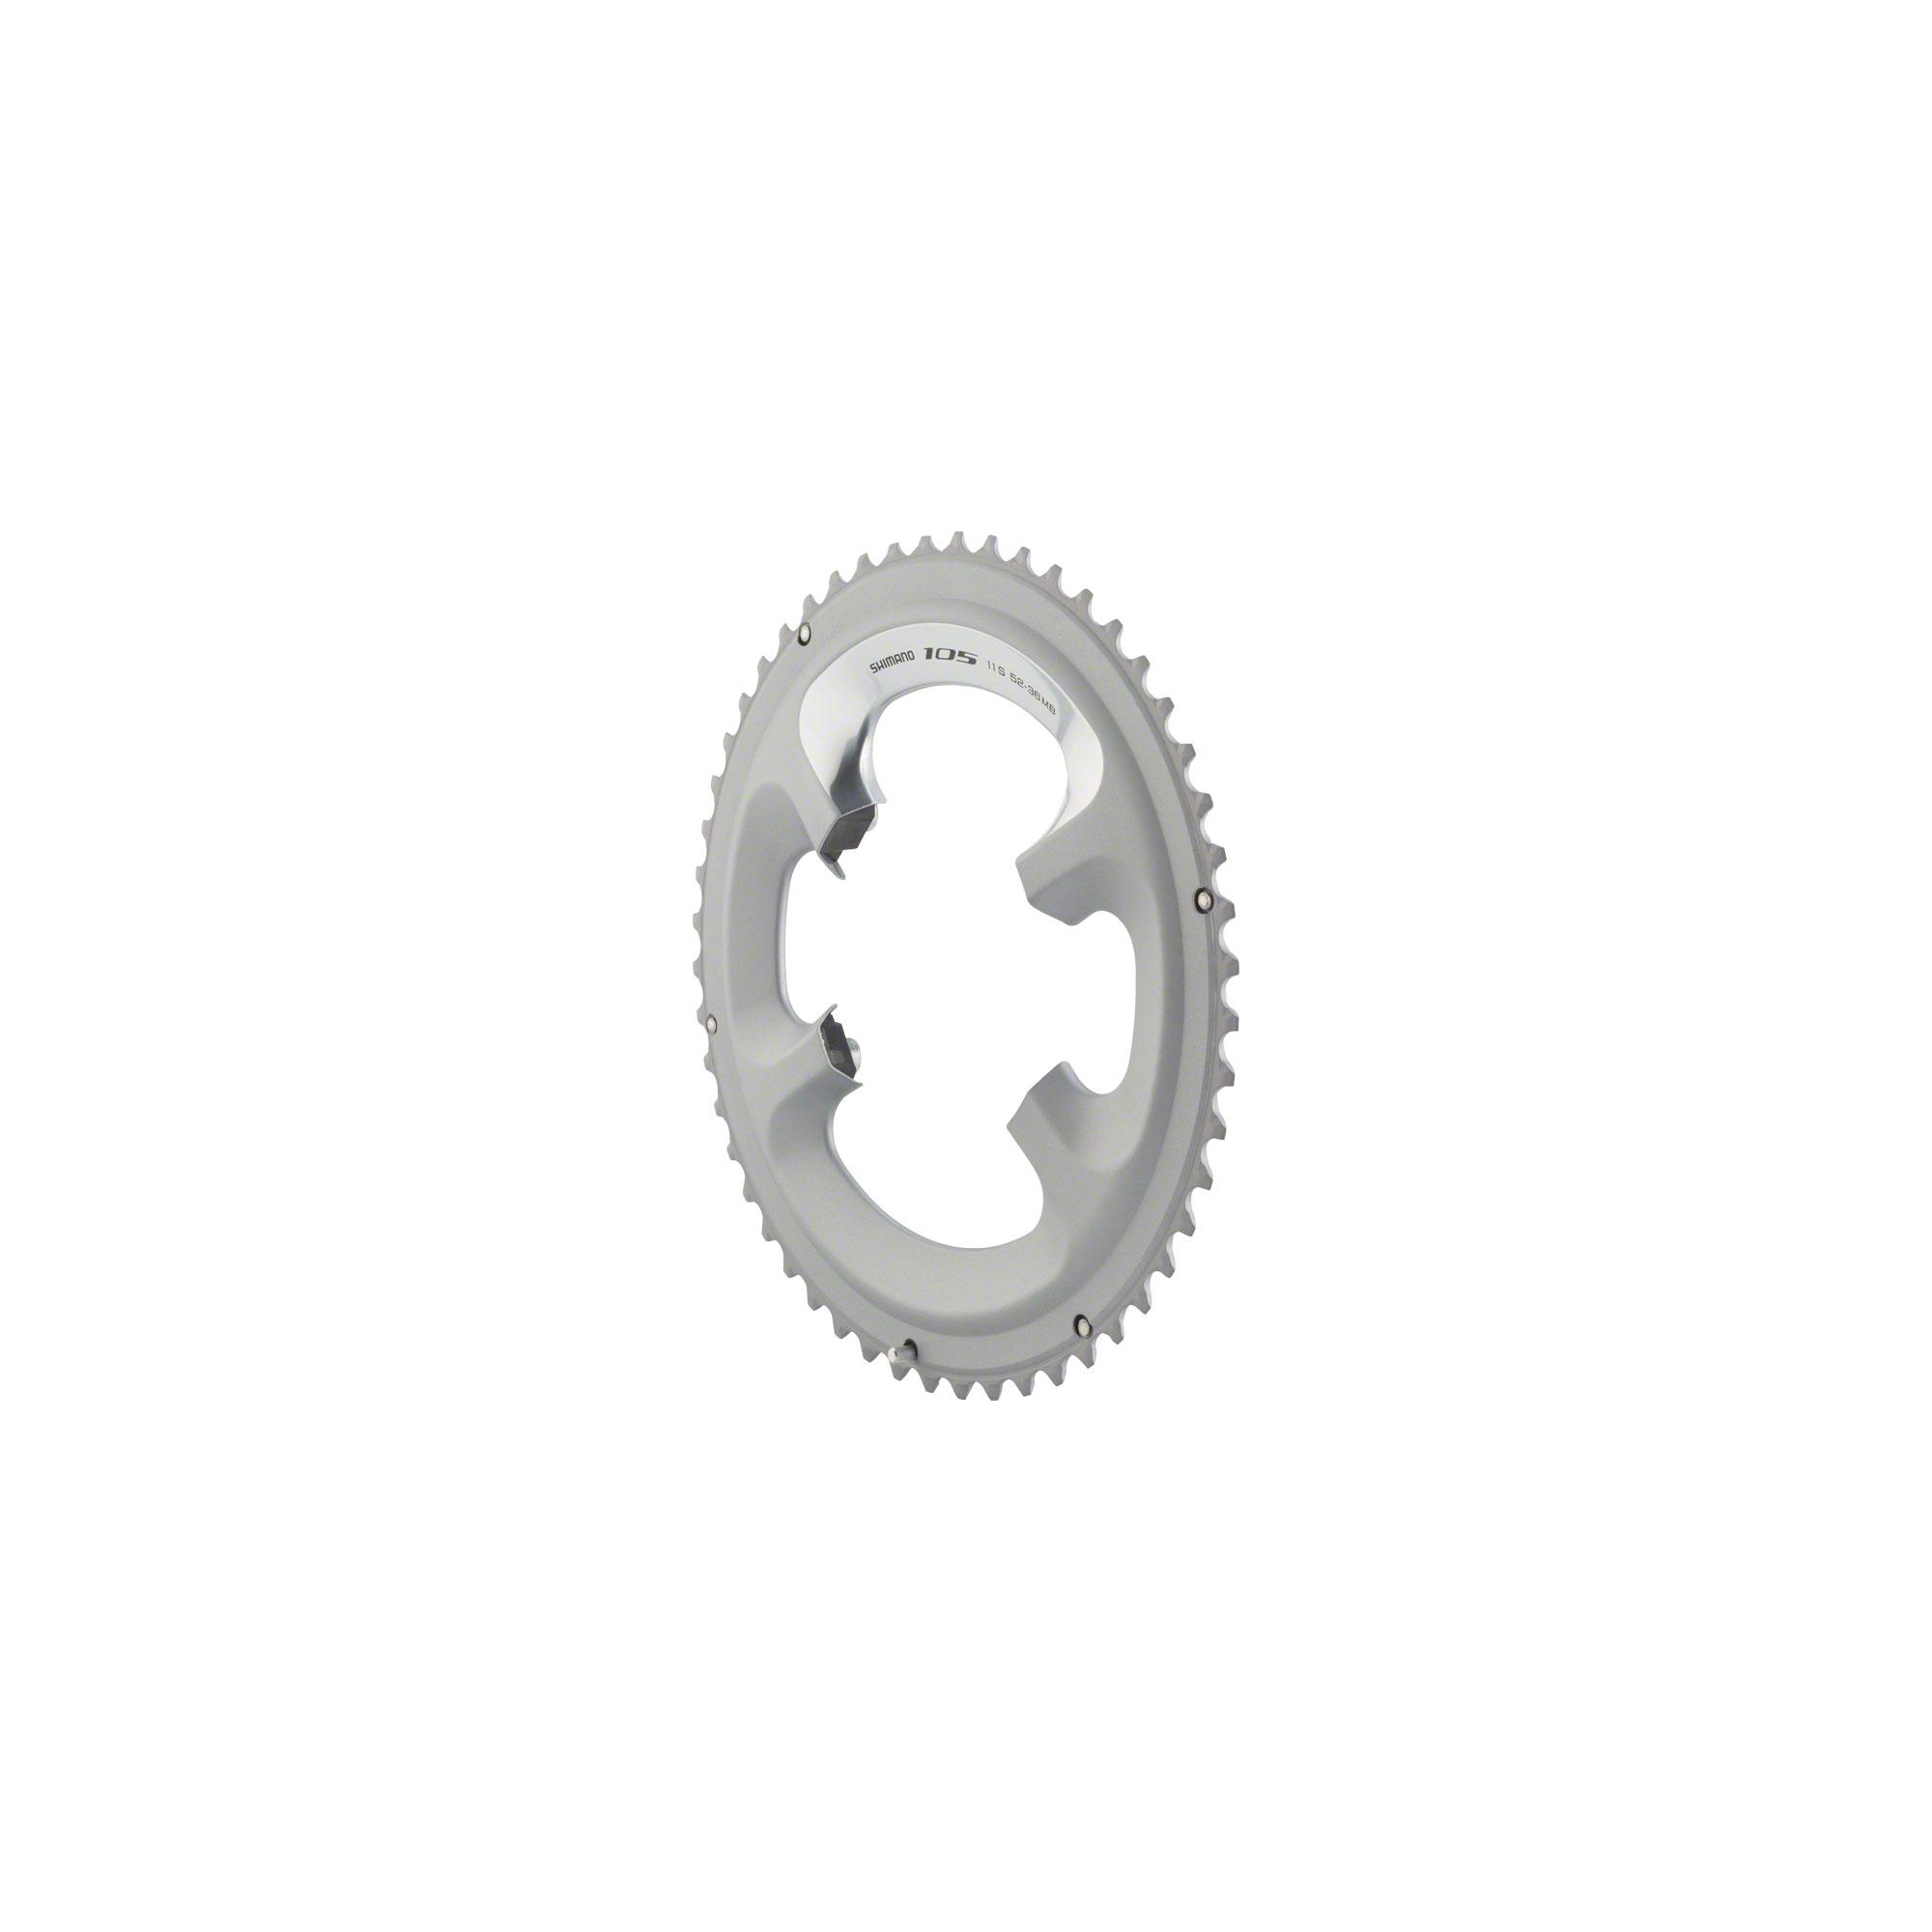 SHIMANO 105 5800-S 50T X 110MM 11-SPEED SILVER BICYCLE CHAINRING FOR 50//34T